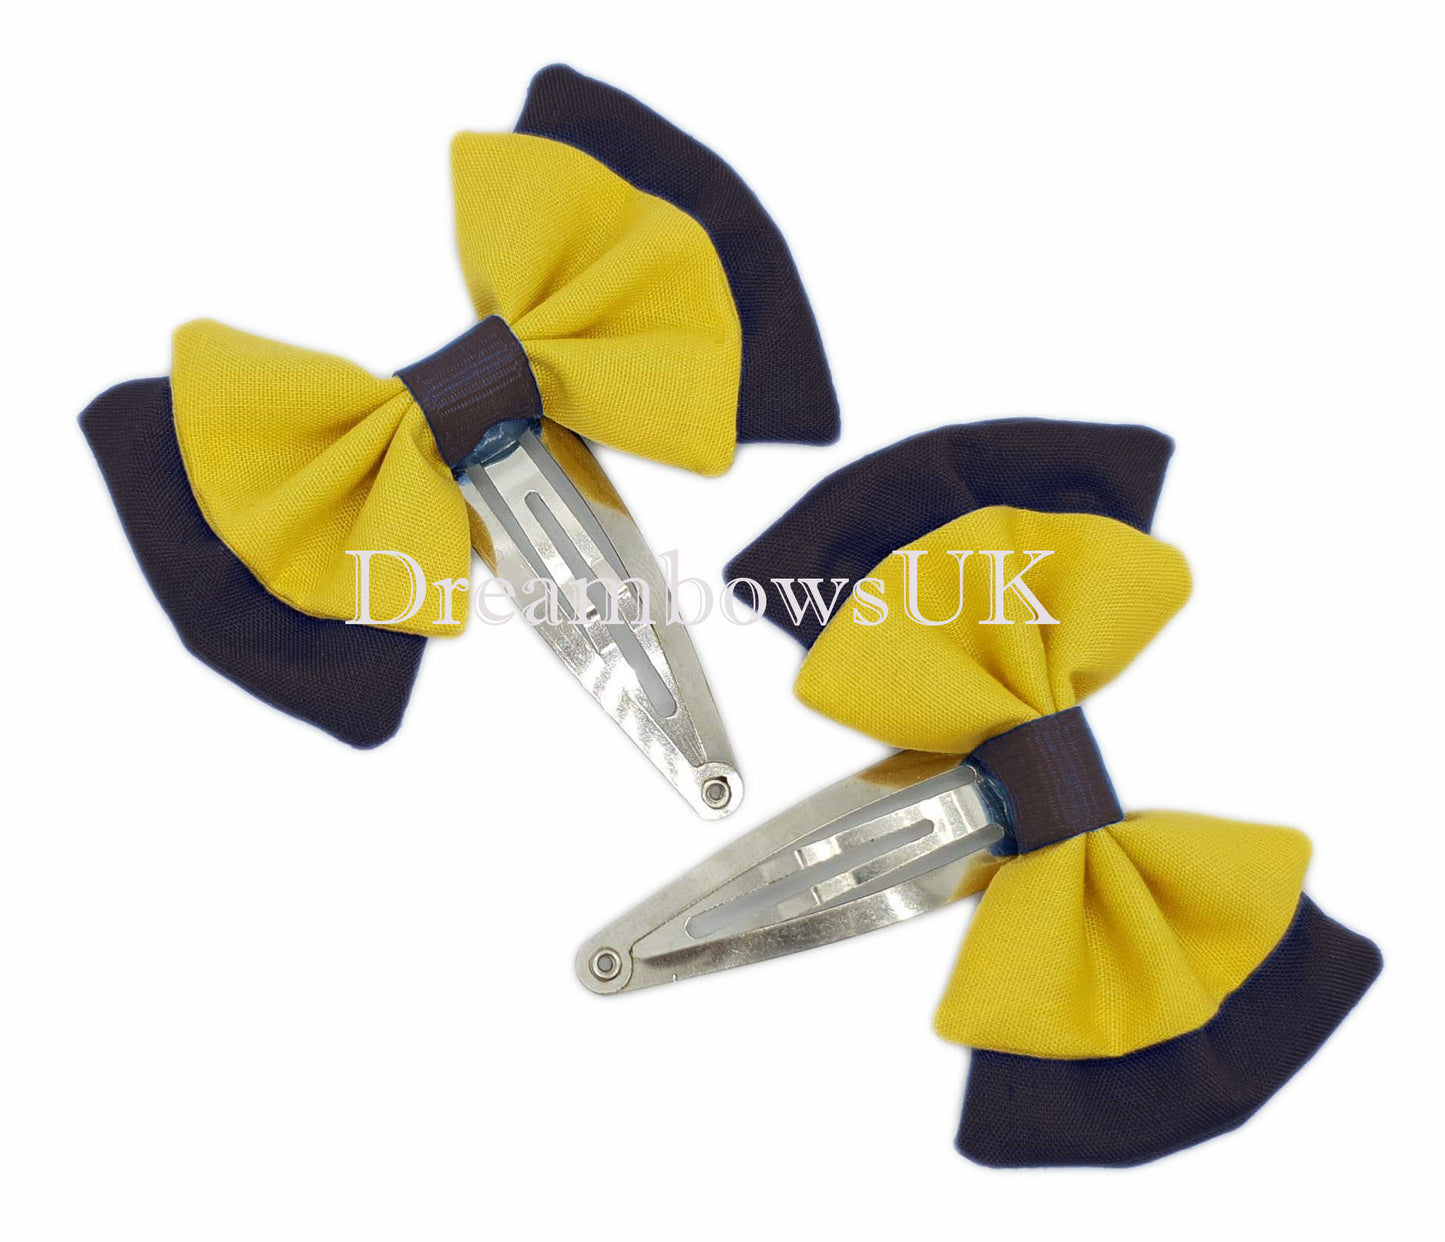 2x Black and golden yellow fabric hair bows